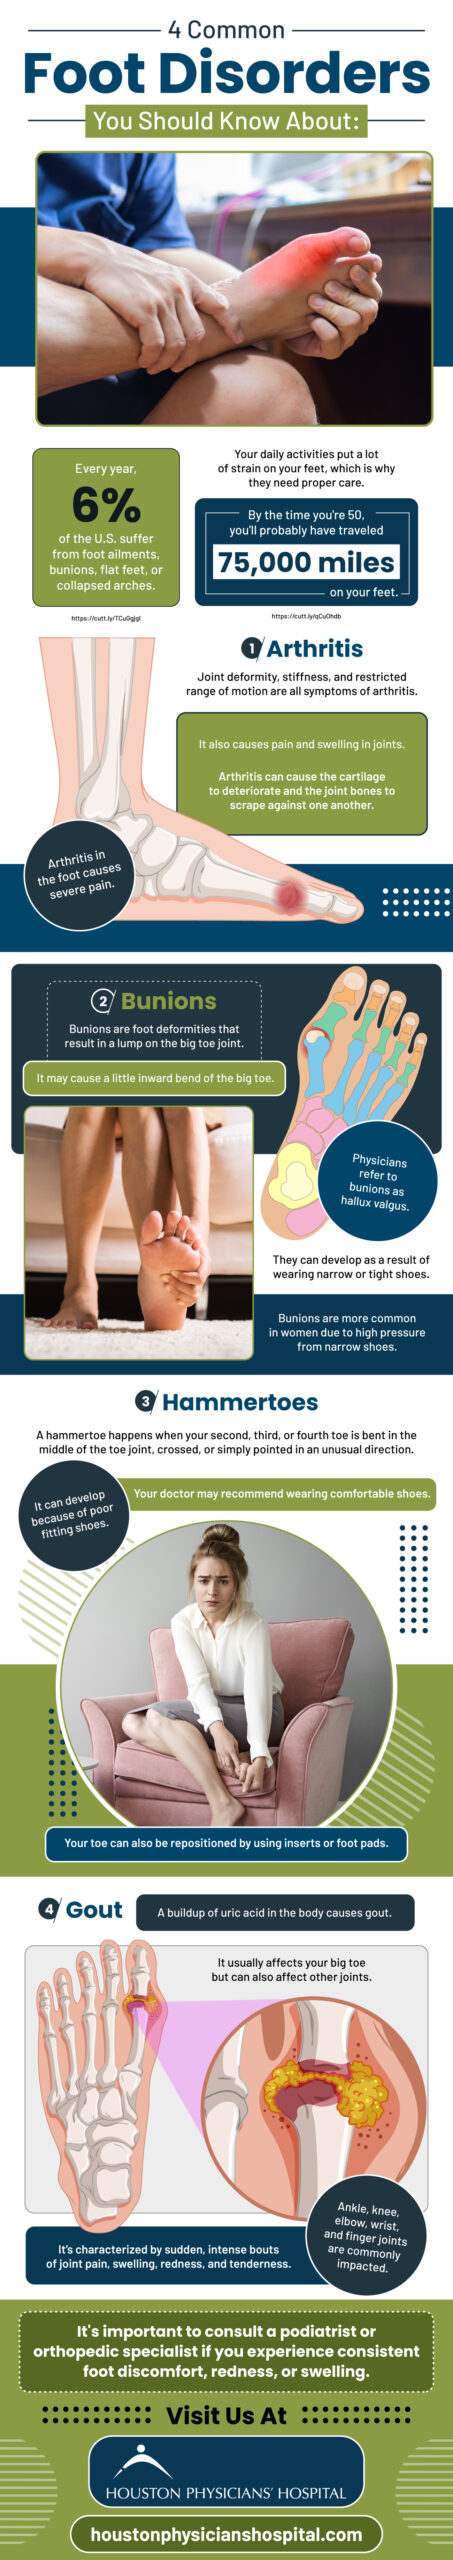 Risk factors of foot disorders we need to know about.